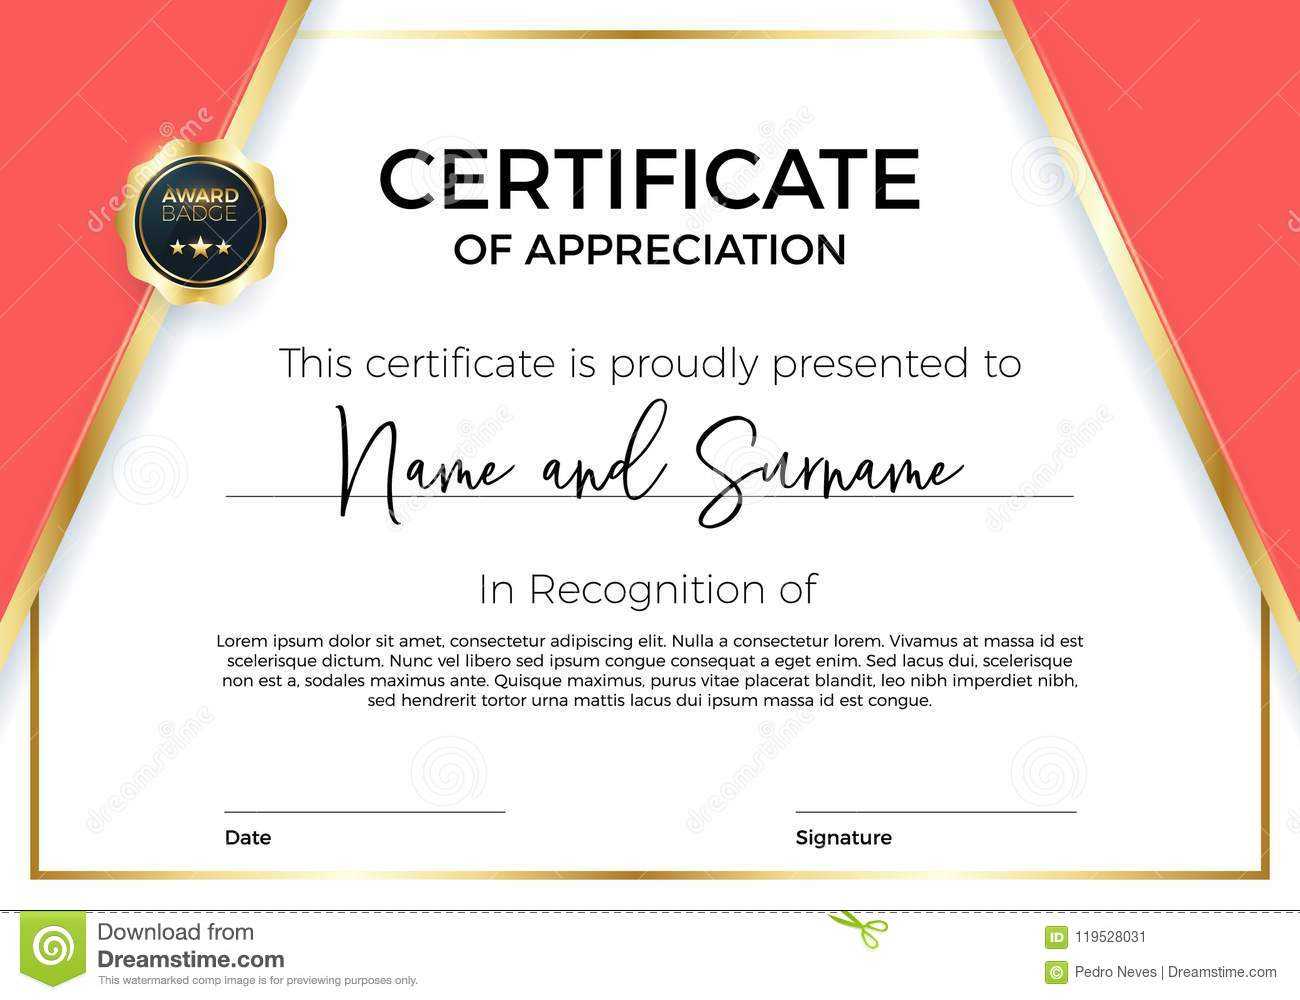 Certificate Of Appreciation Or Achievement With Award Badge Intended For Sample Award Certificates Templates